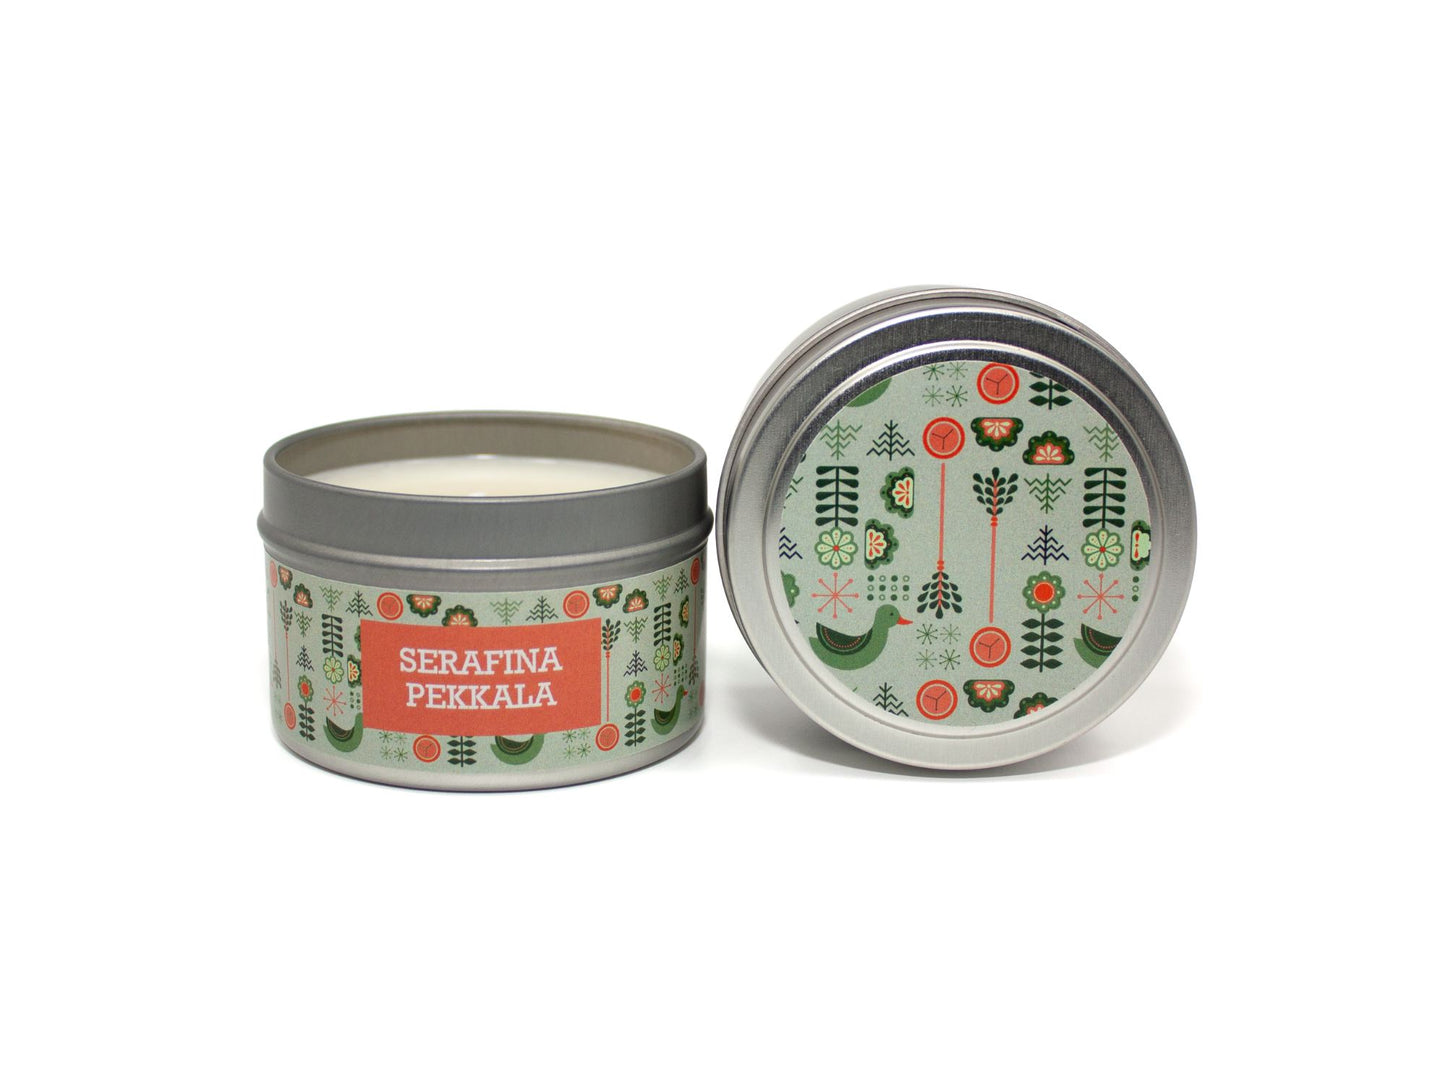 Onset & Rime floral pine scented candle called "Serafina Pekkala" in a 4 oz silver tin. The circular label on top is pale green with a pattern of pine branches, compasses, a goose and more arctic symbols. The text on the front label is "Serafina Pekkala - Geranium, Neroli, Cloud Pine, Arctic Air".